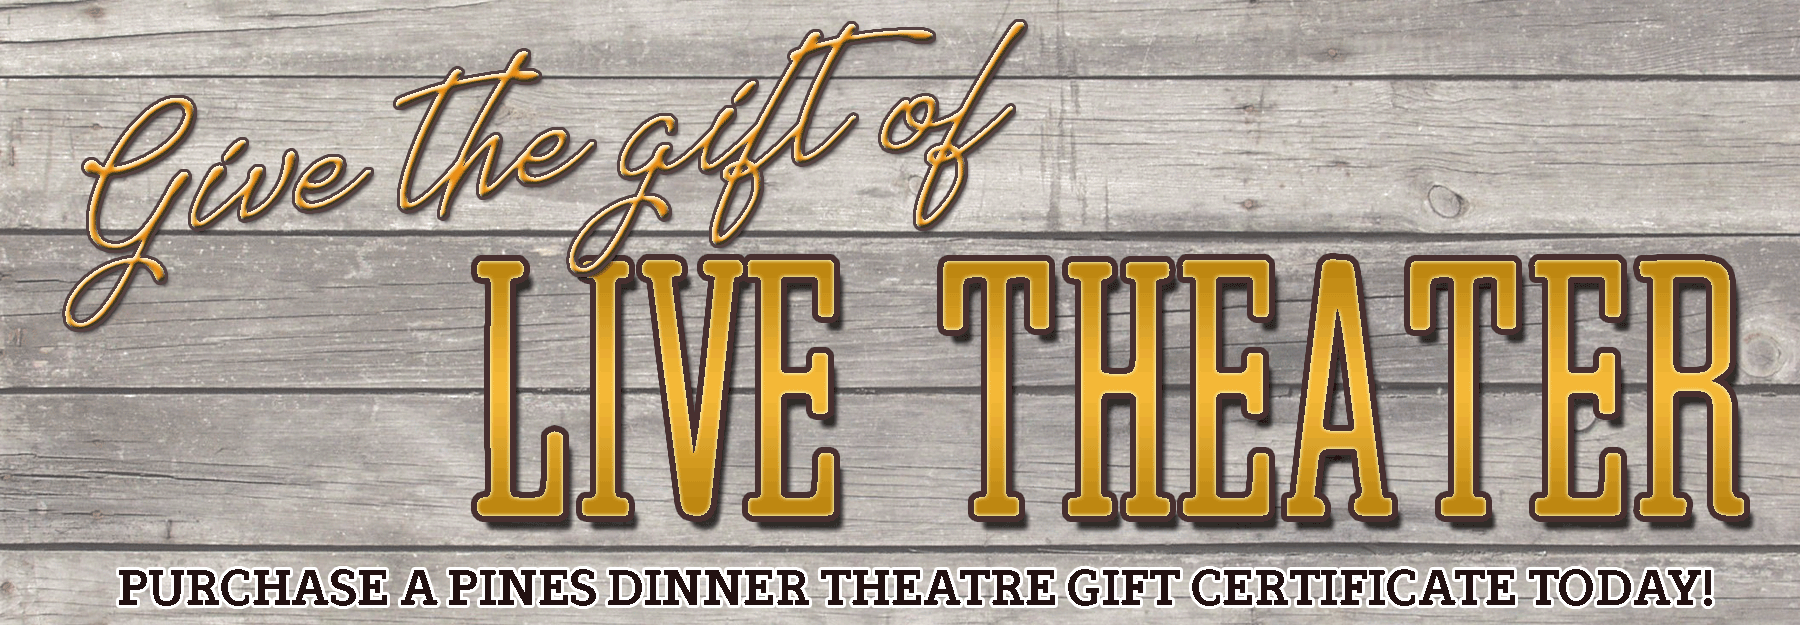 Support live, local theater with the purchase of a Pines Dinner Theatre gift certificate. Certificates never expire, and are good for everything here at the Pines, including tickets, food and beverage purchases, and more.